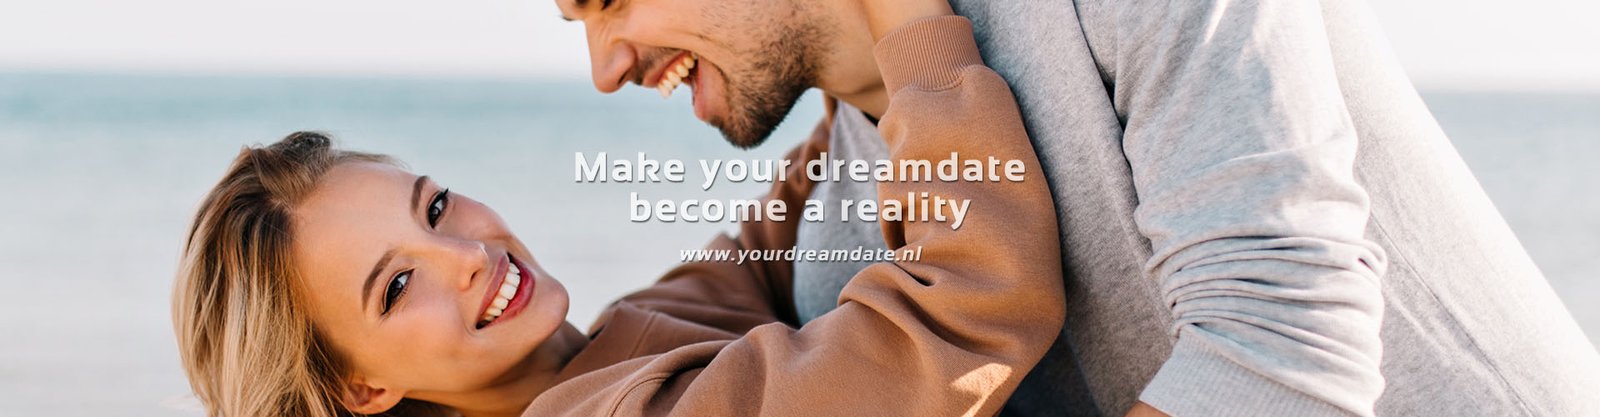 yourdreamdate.nl